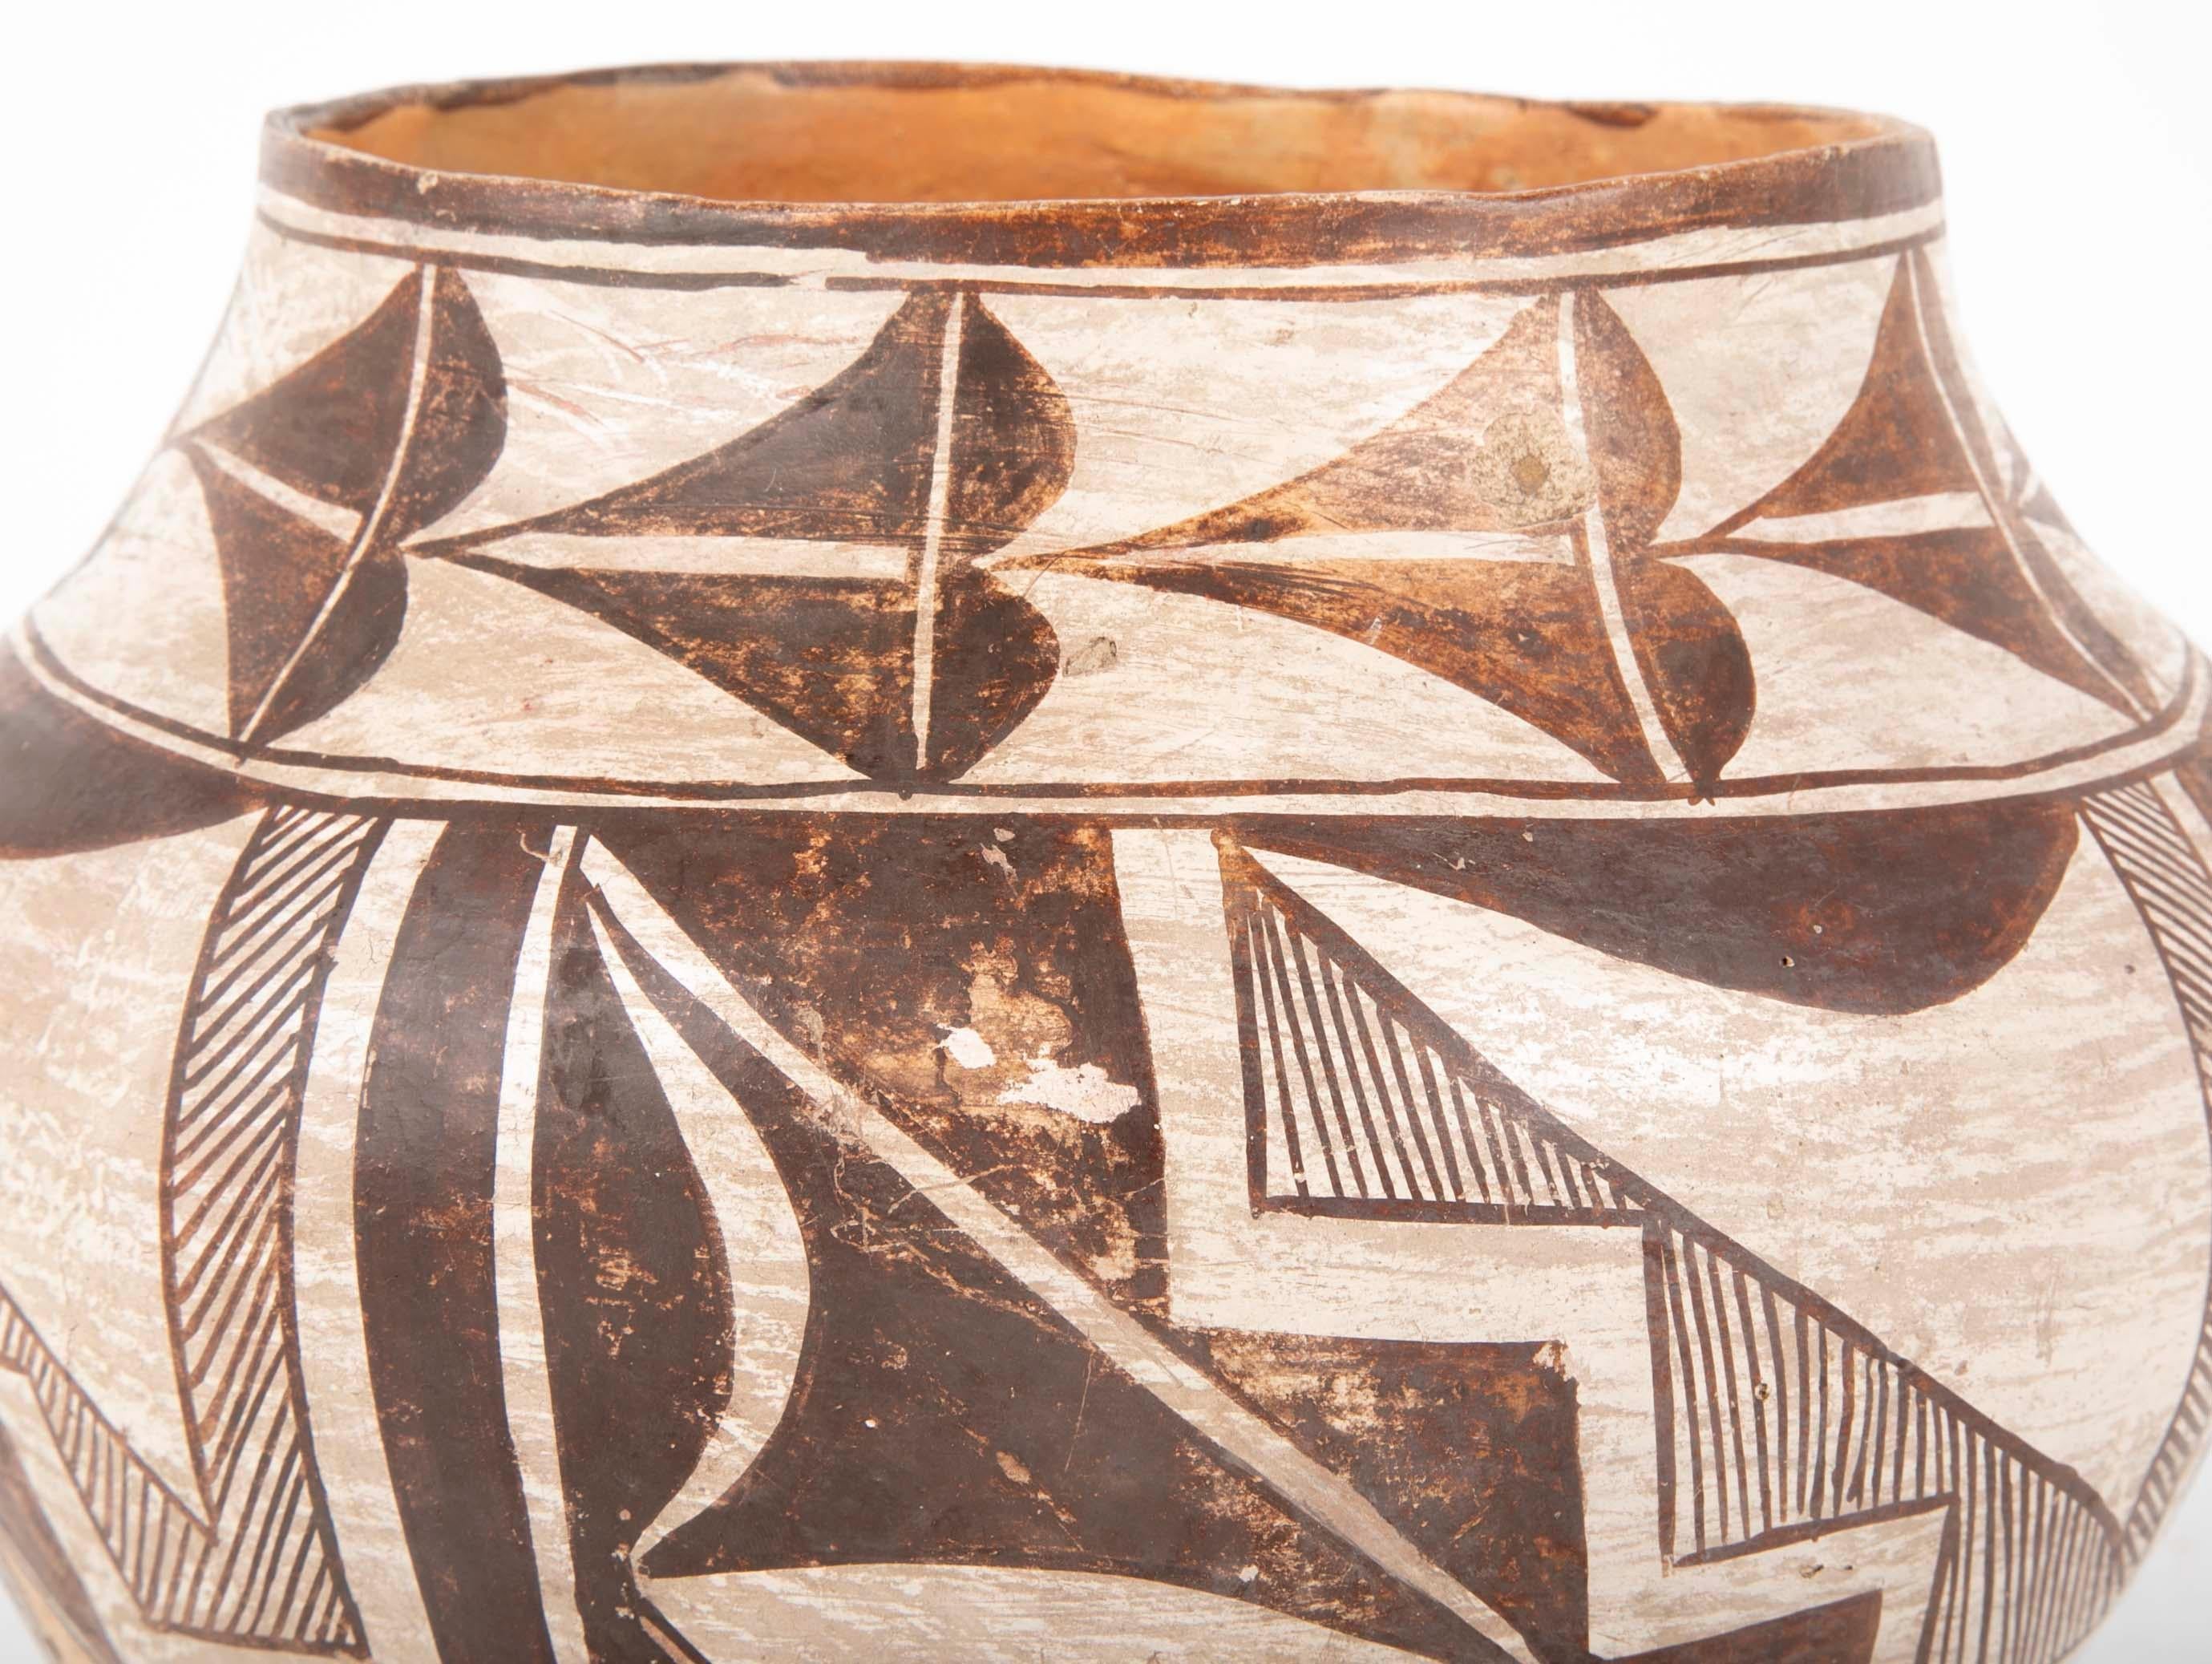 An Acoma Ceramic Vase from the Second Quarter of the 20th Century 2